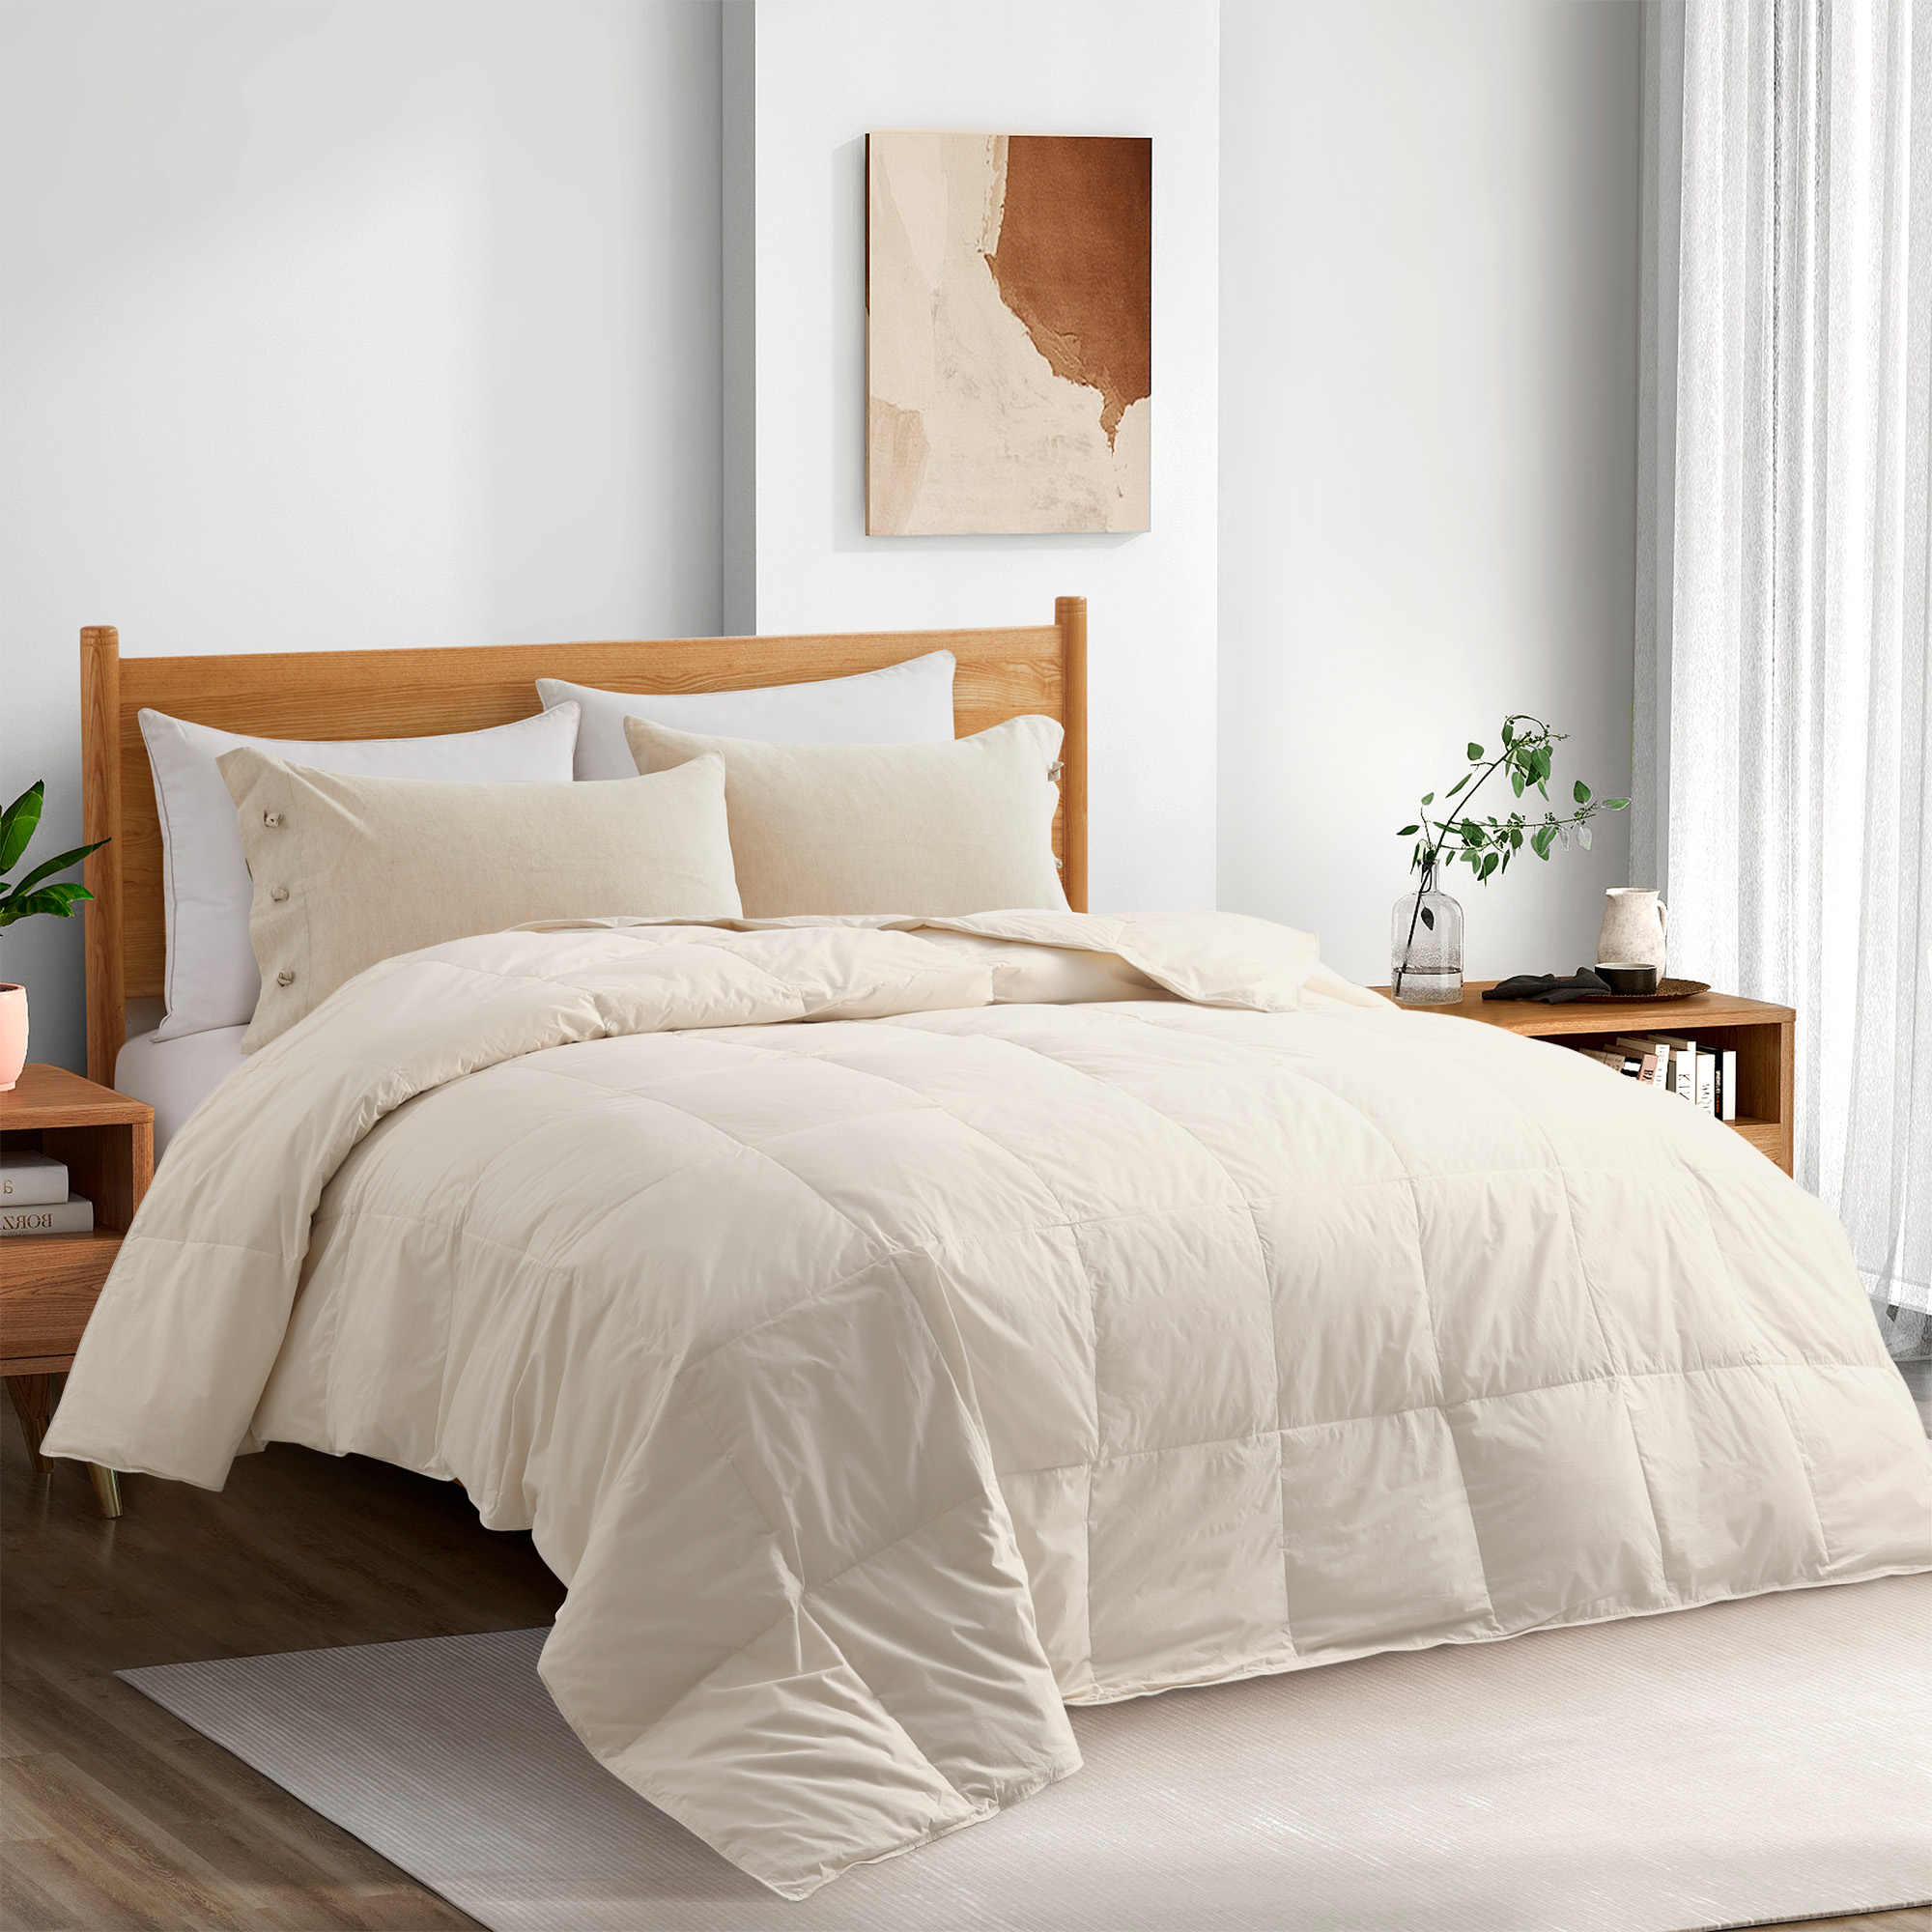 Premium Lightweight Organic Cotton Comforter With Down And Feather Fiber Fill - Perfect For Summer - King